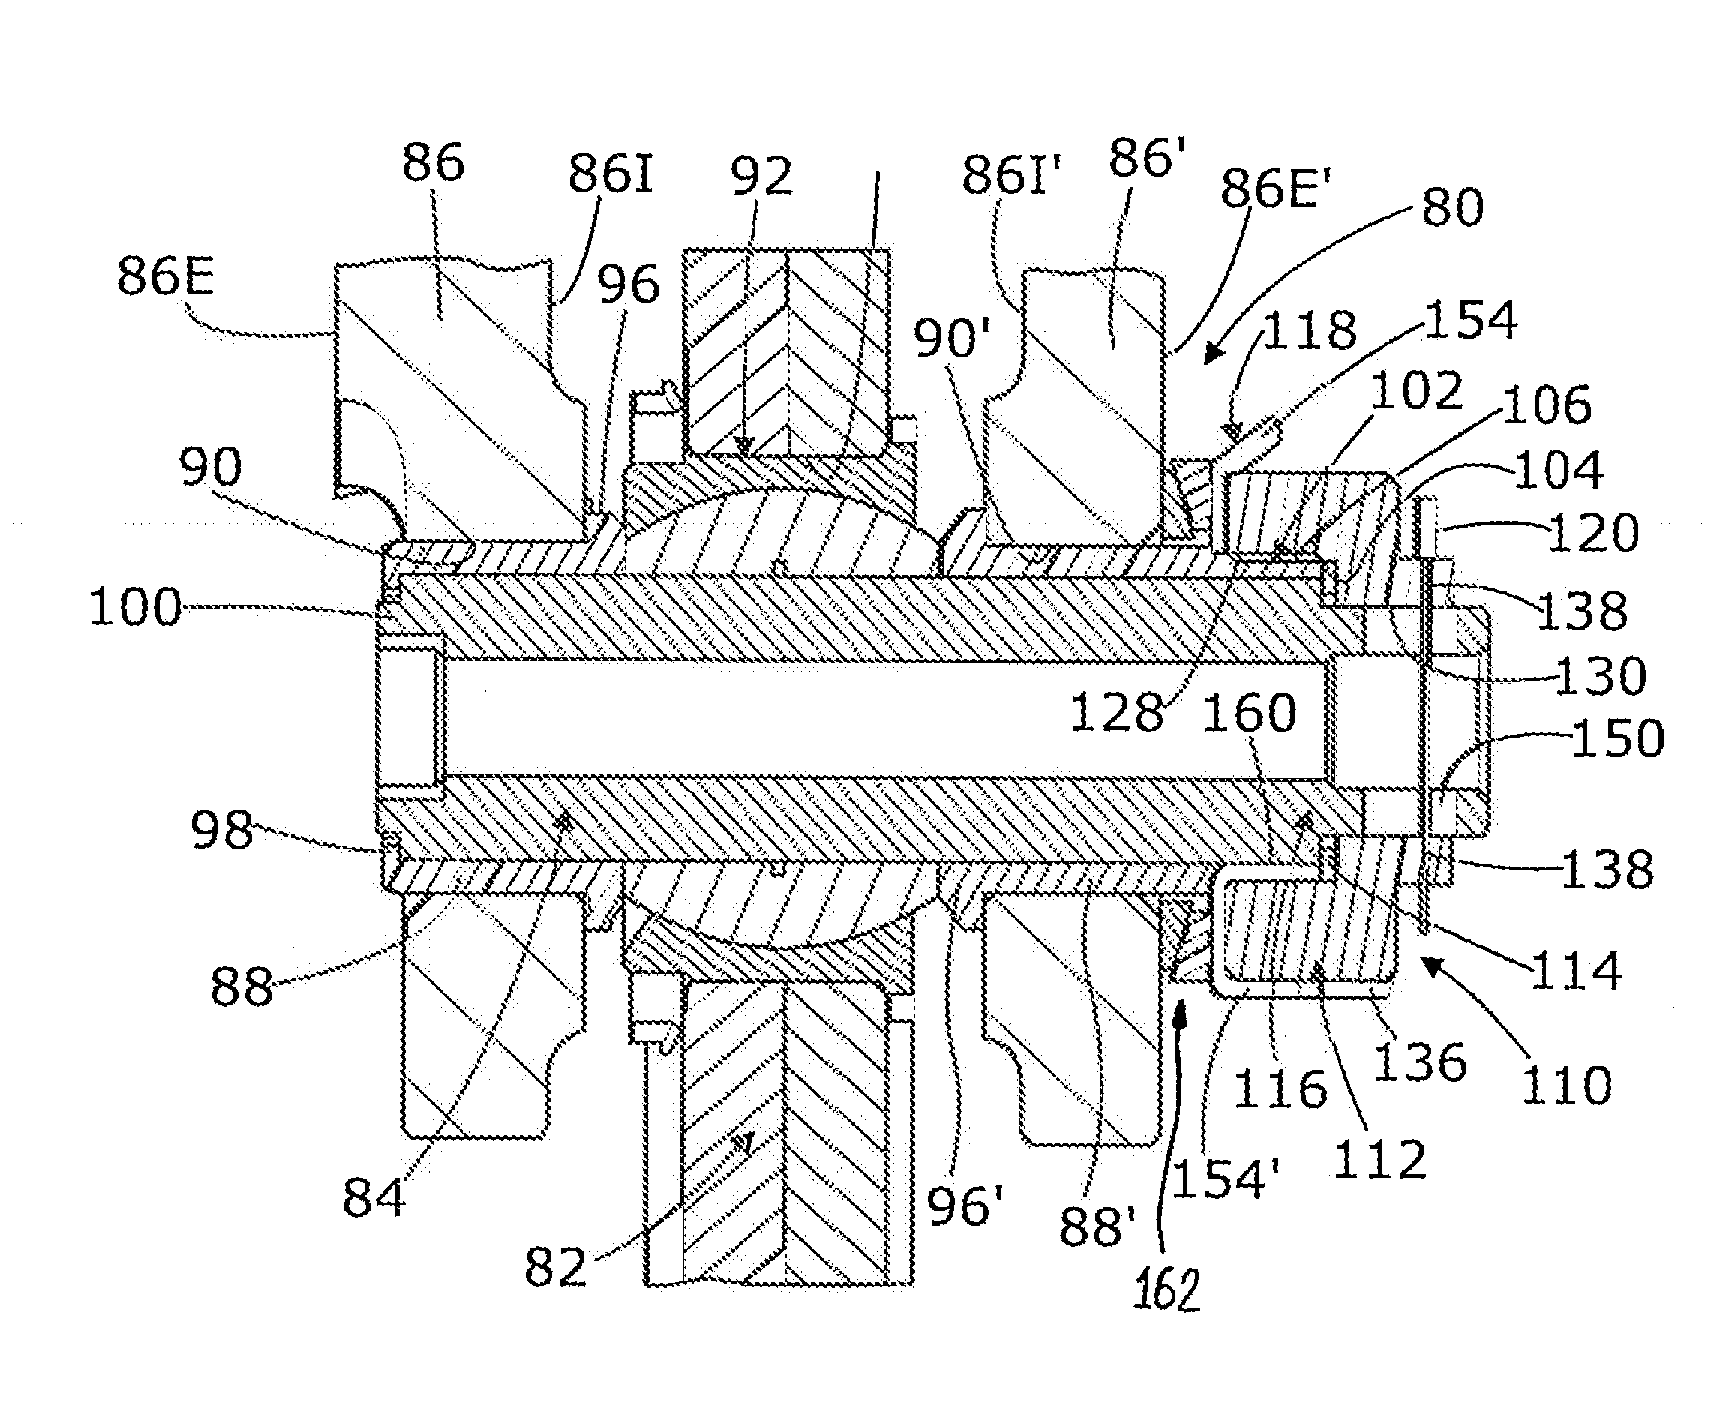 Assembly comprising an articulation spindle supported by a clevis and immobilized in translation by a blocking device integrating a double Anti-rotation system